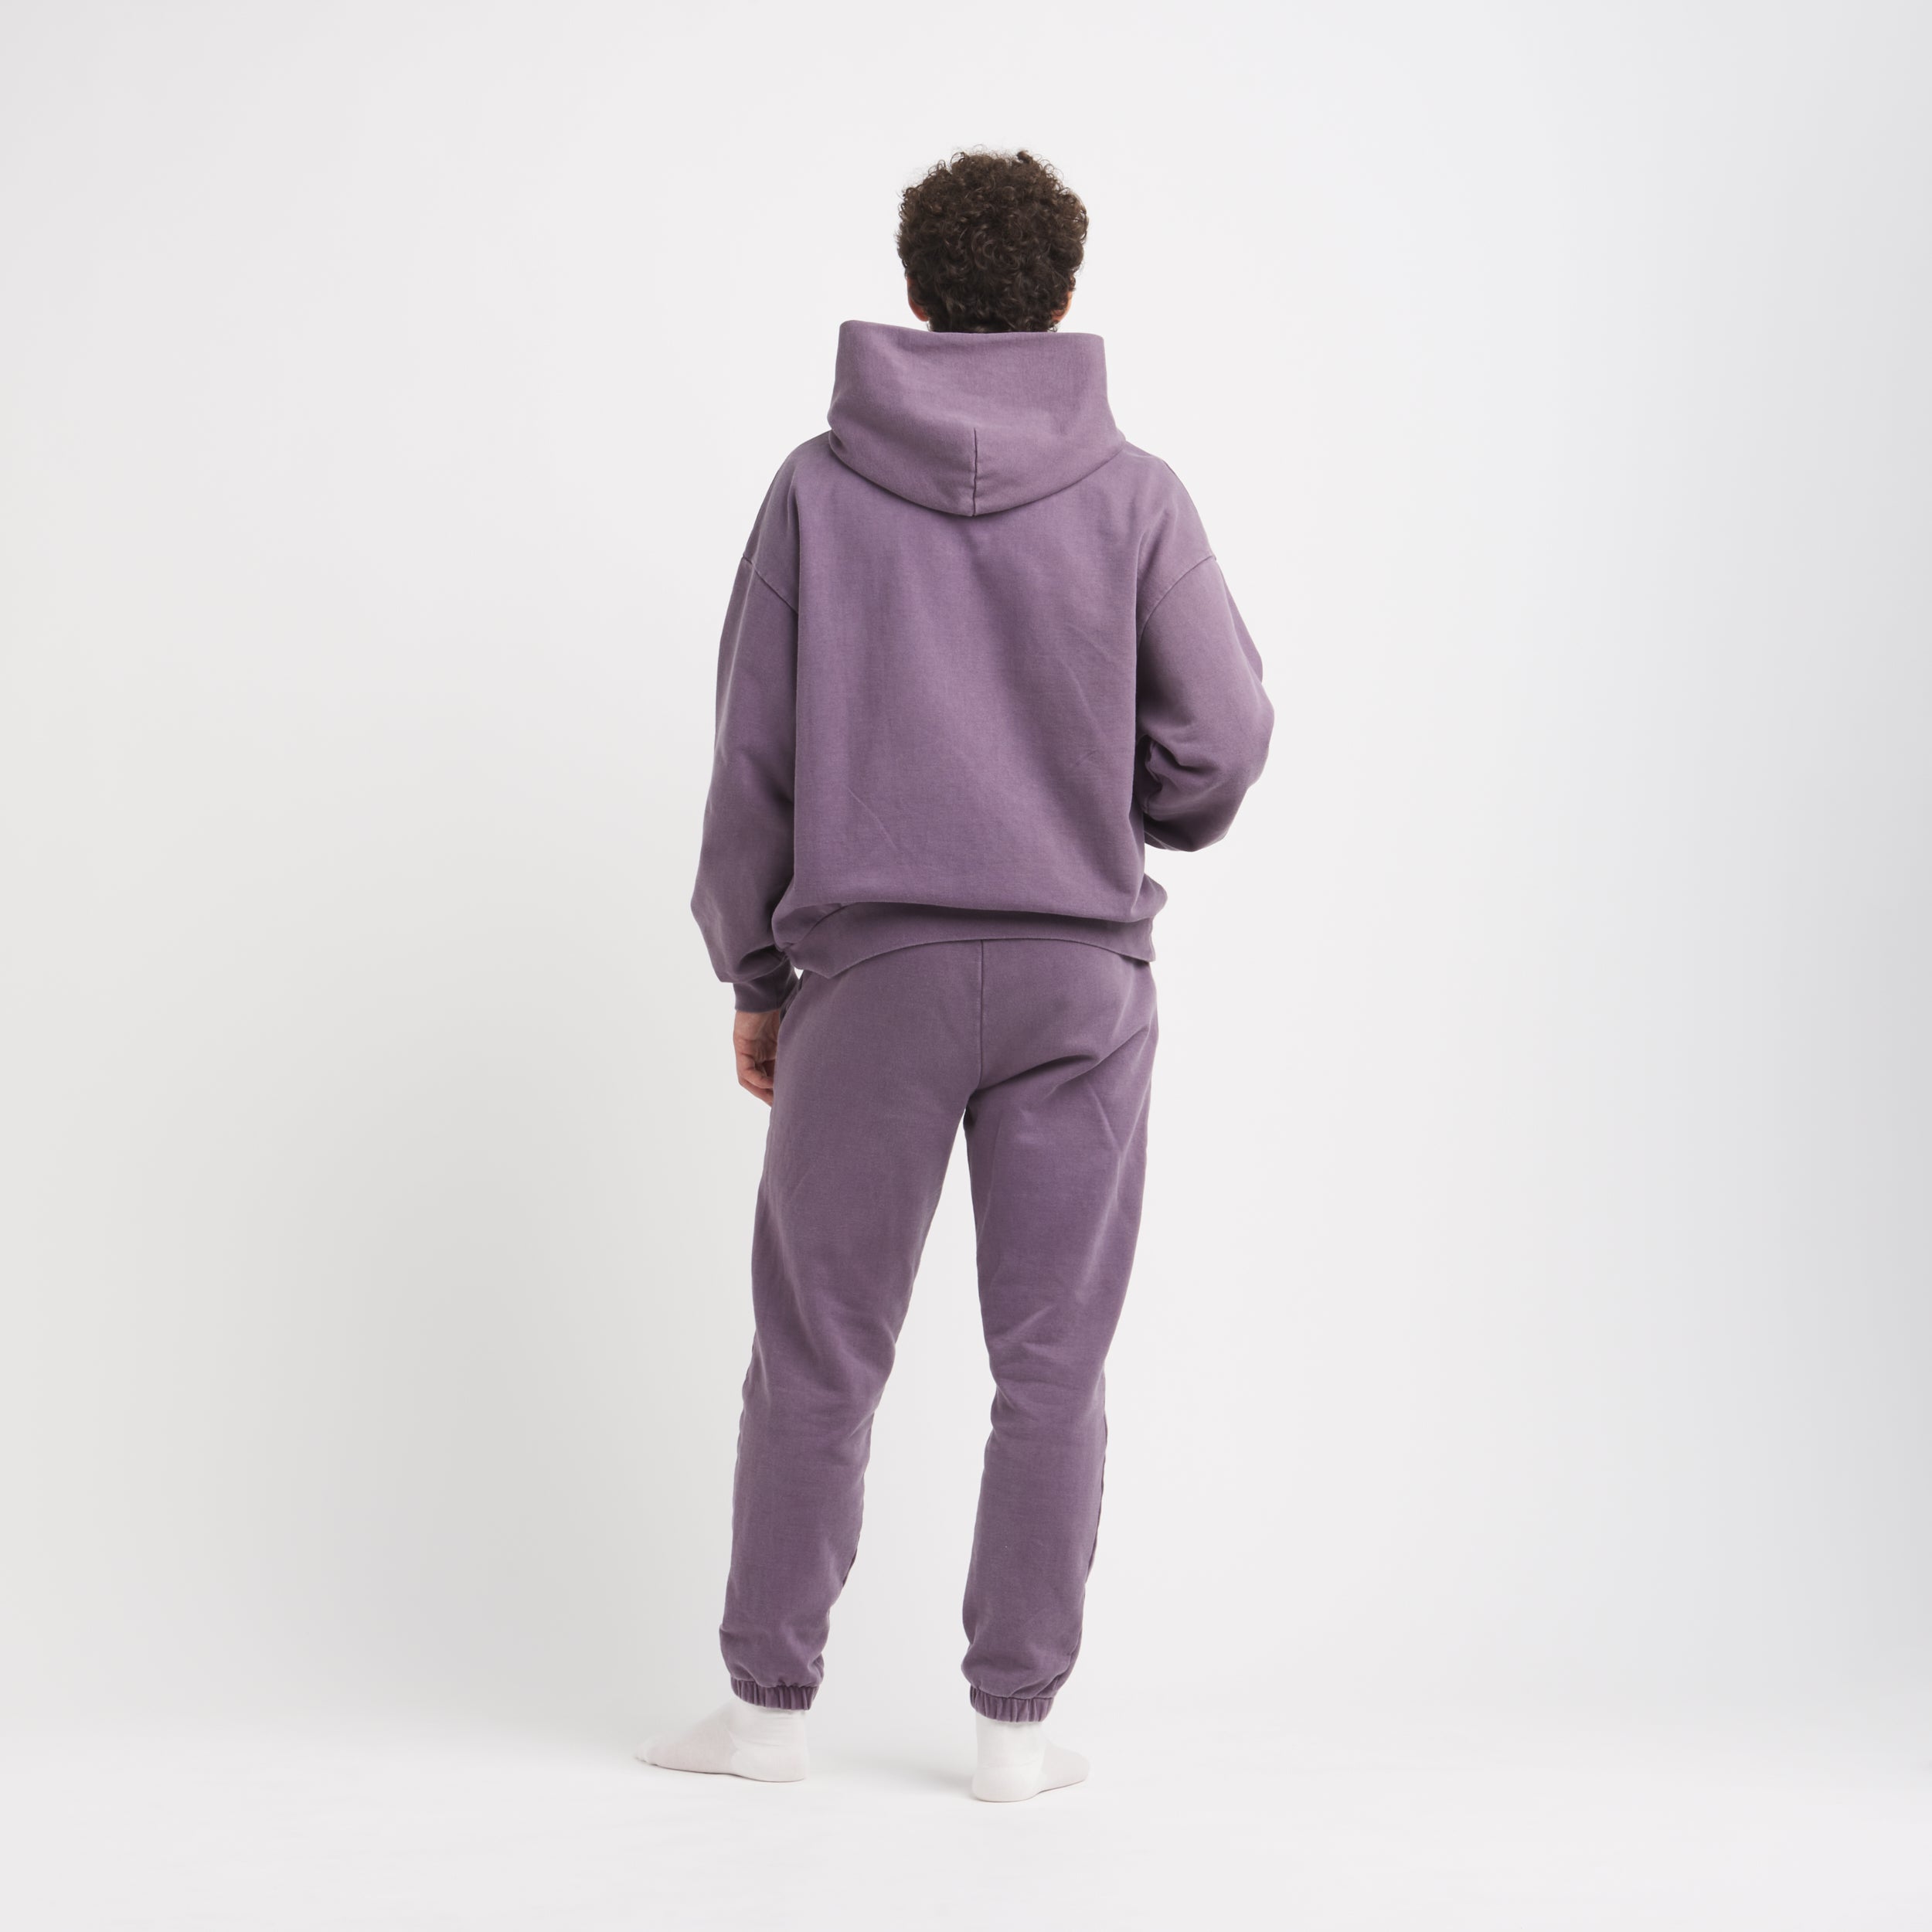 Organic Trousers Madder Violet